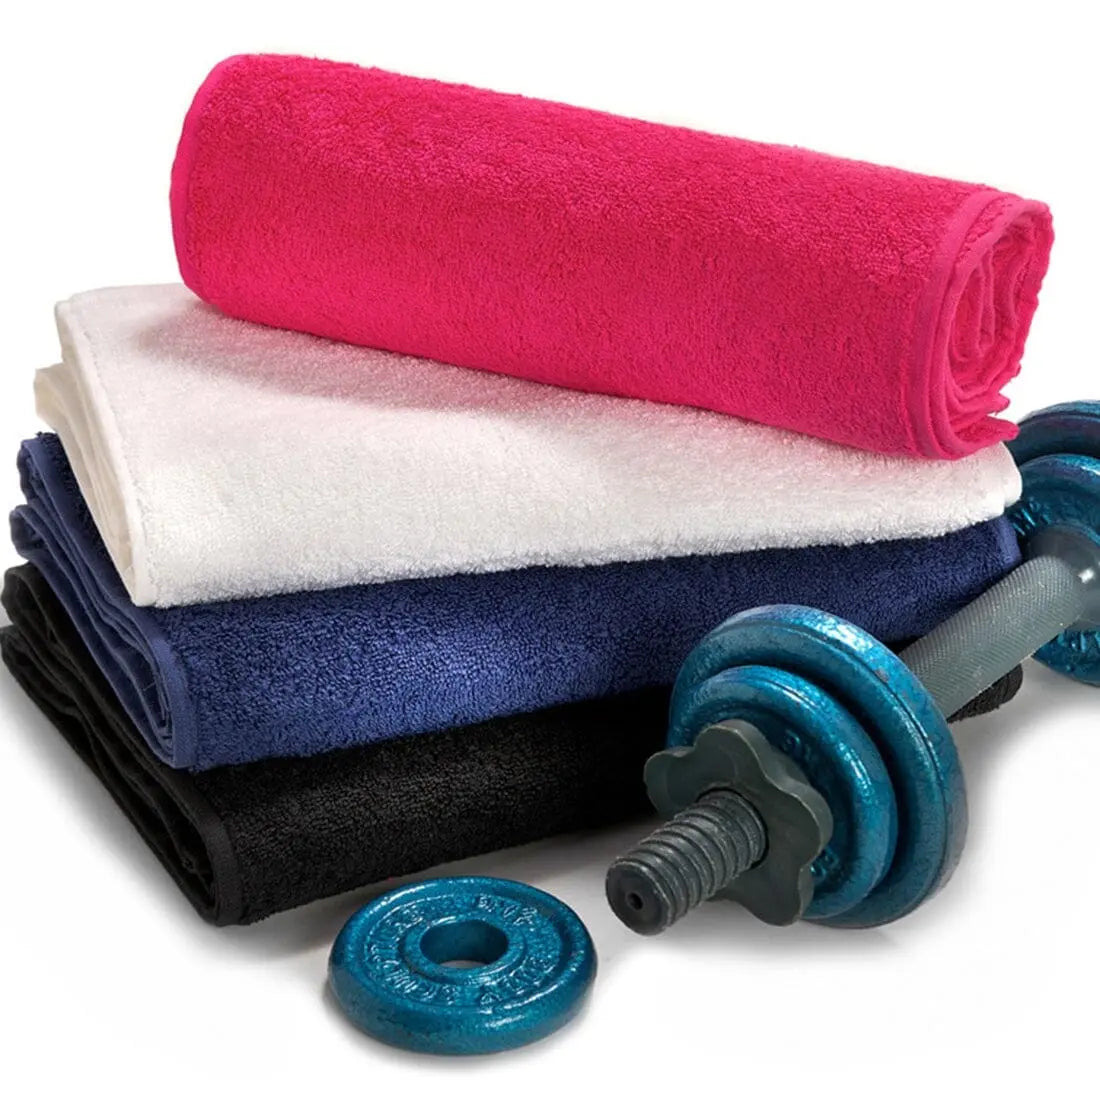 Bale of multiple gym towel colours with a dumbbell